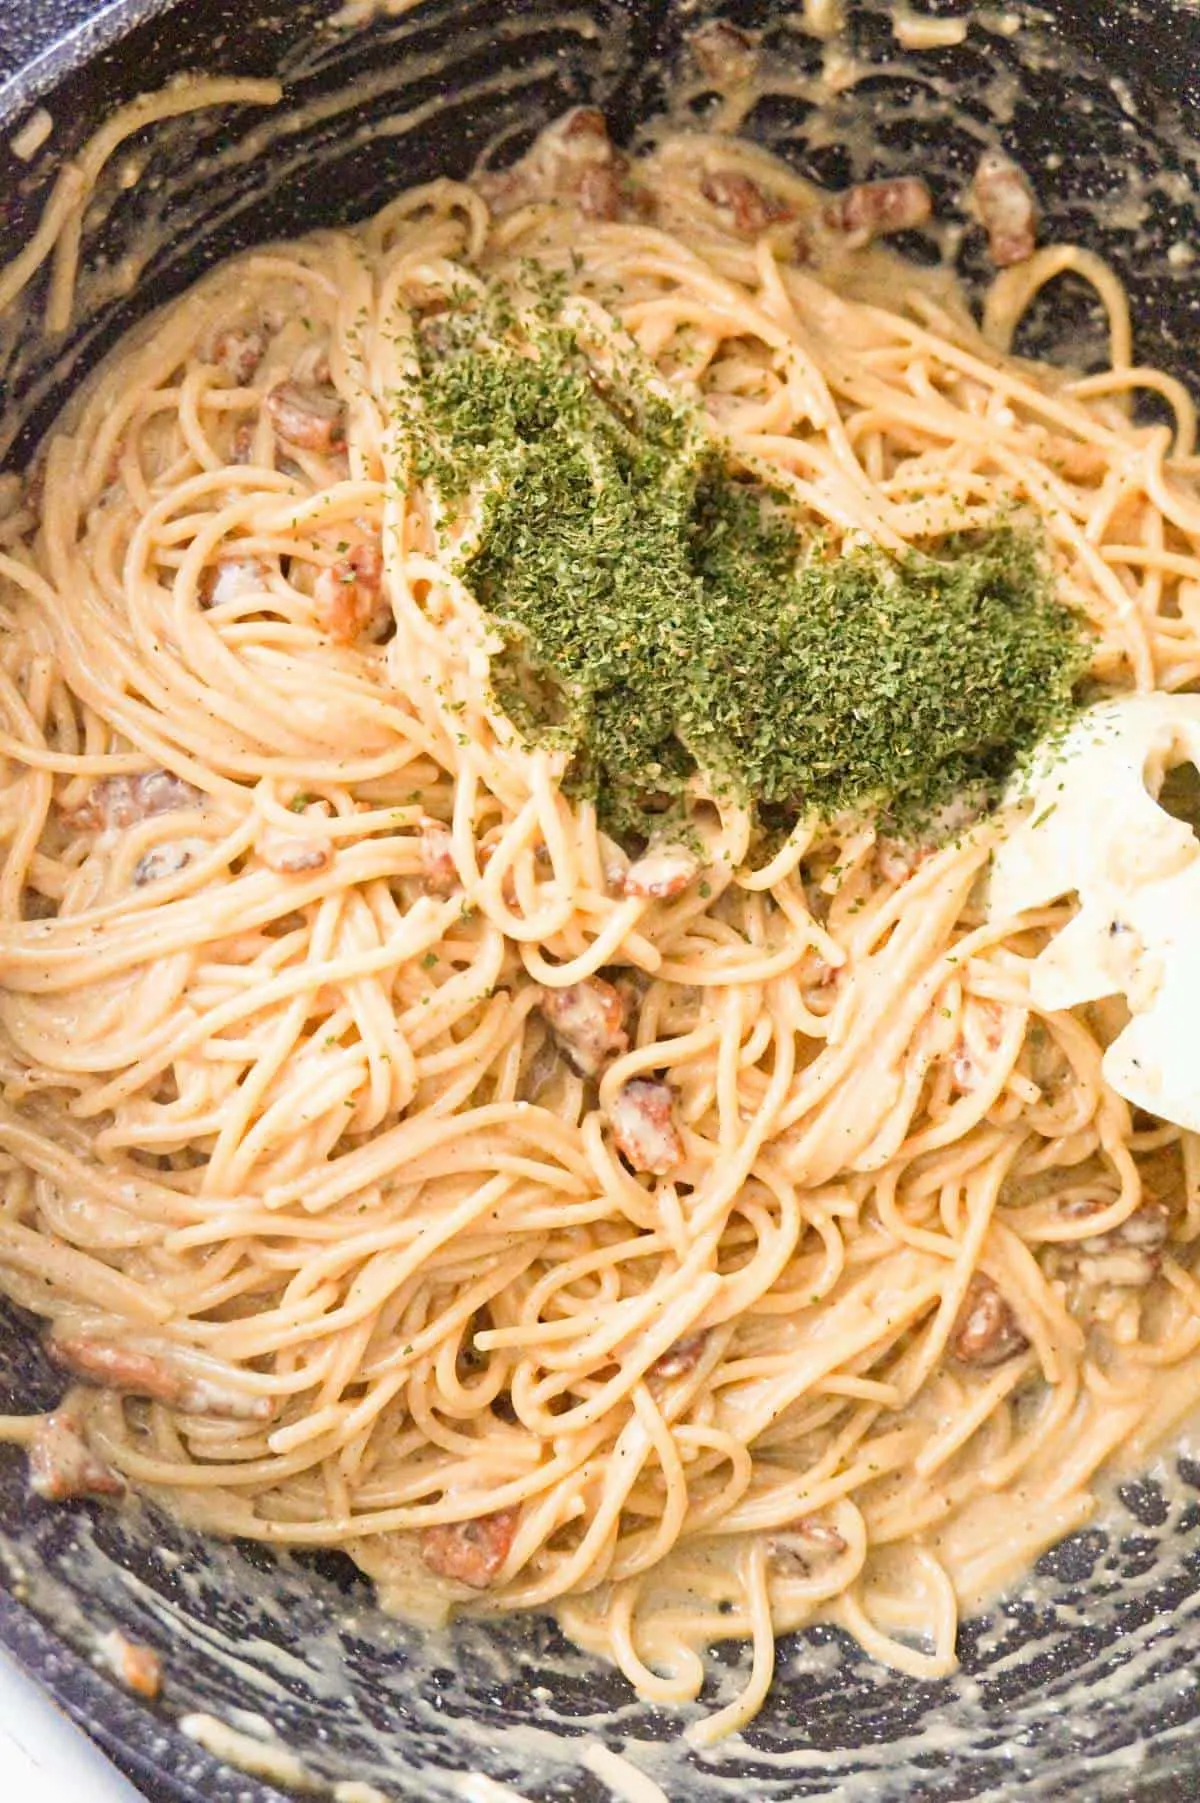 parsley flakes on top of spaghetti carbonara in a saute pan